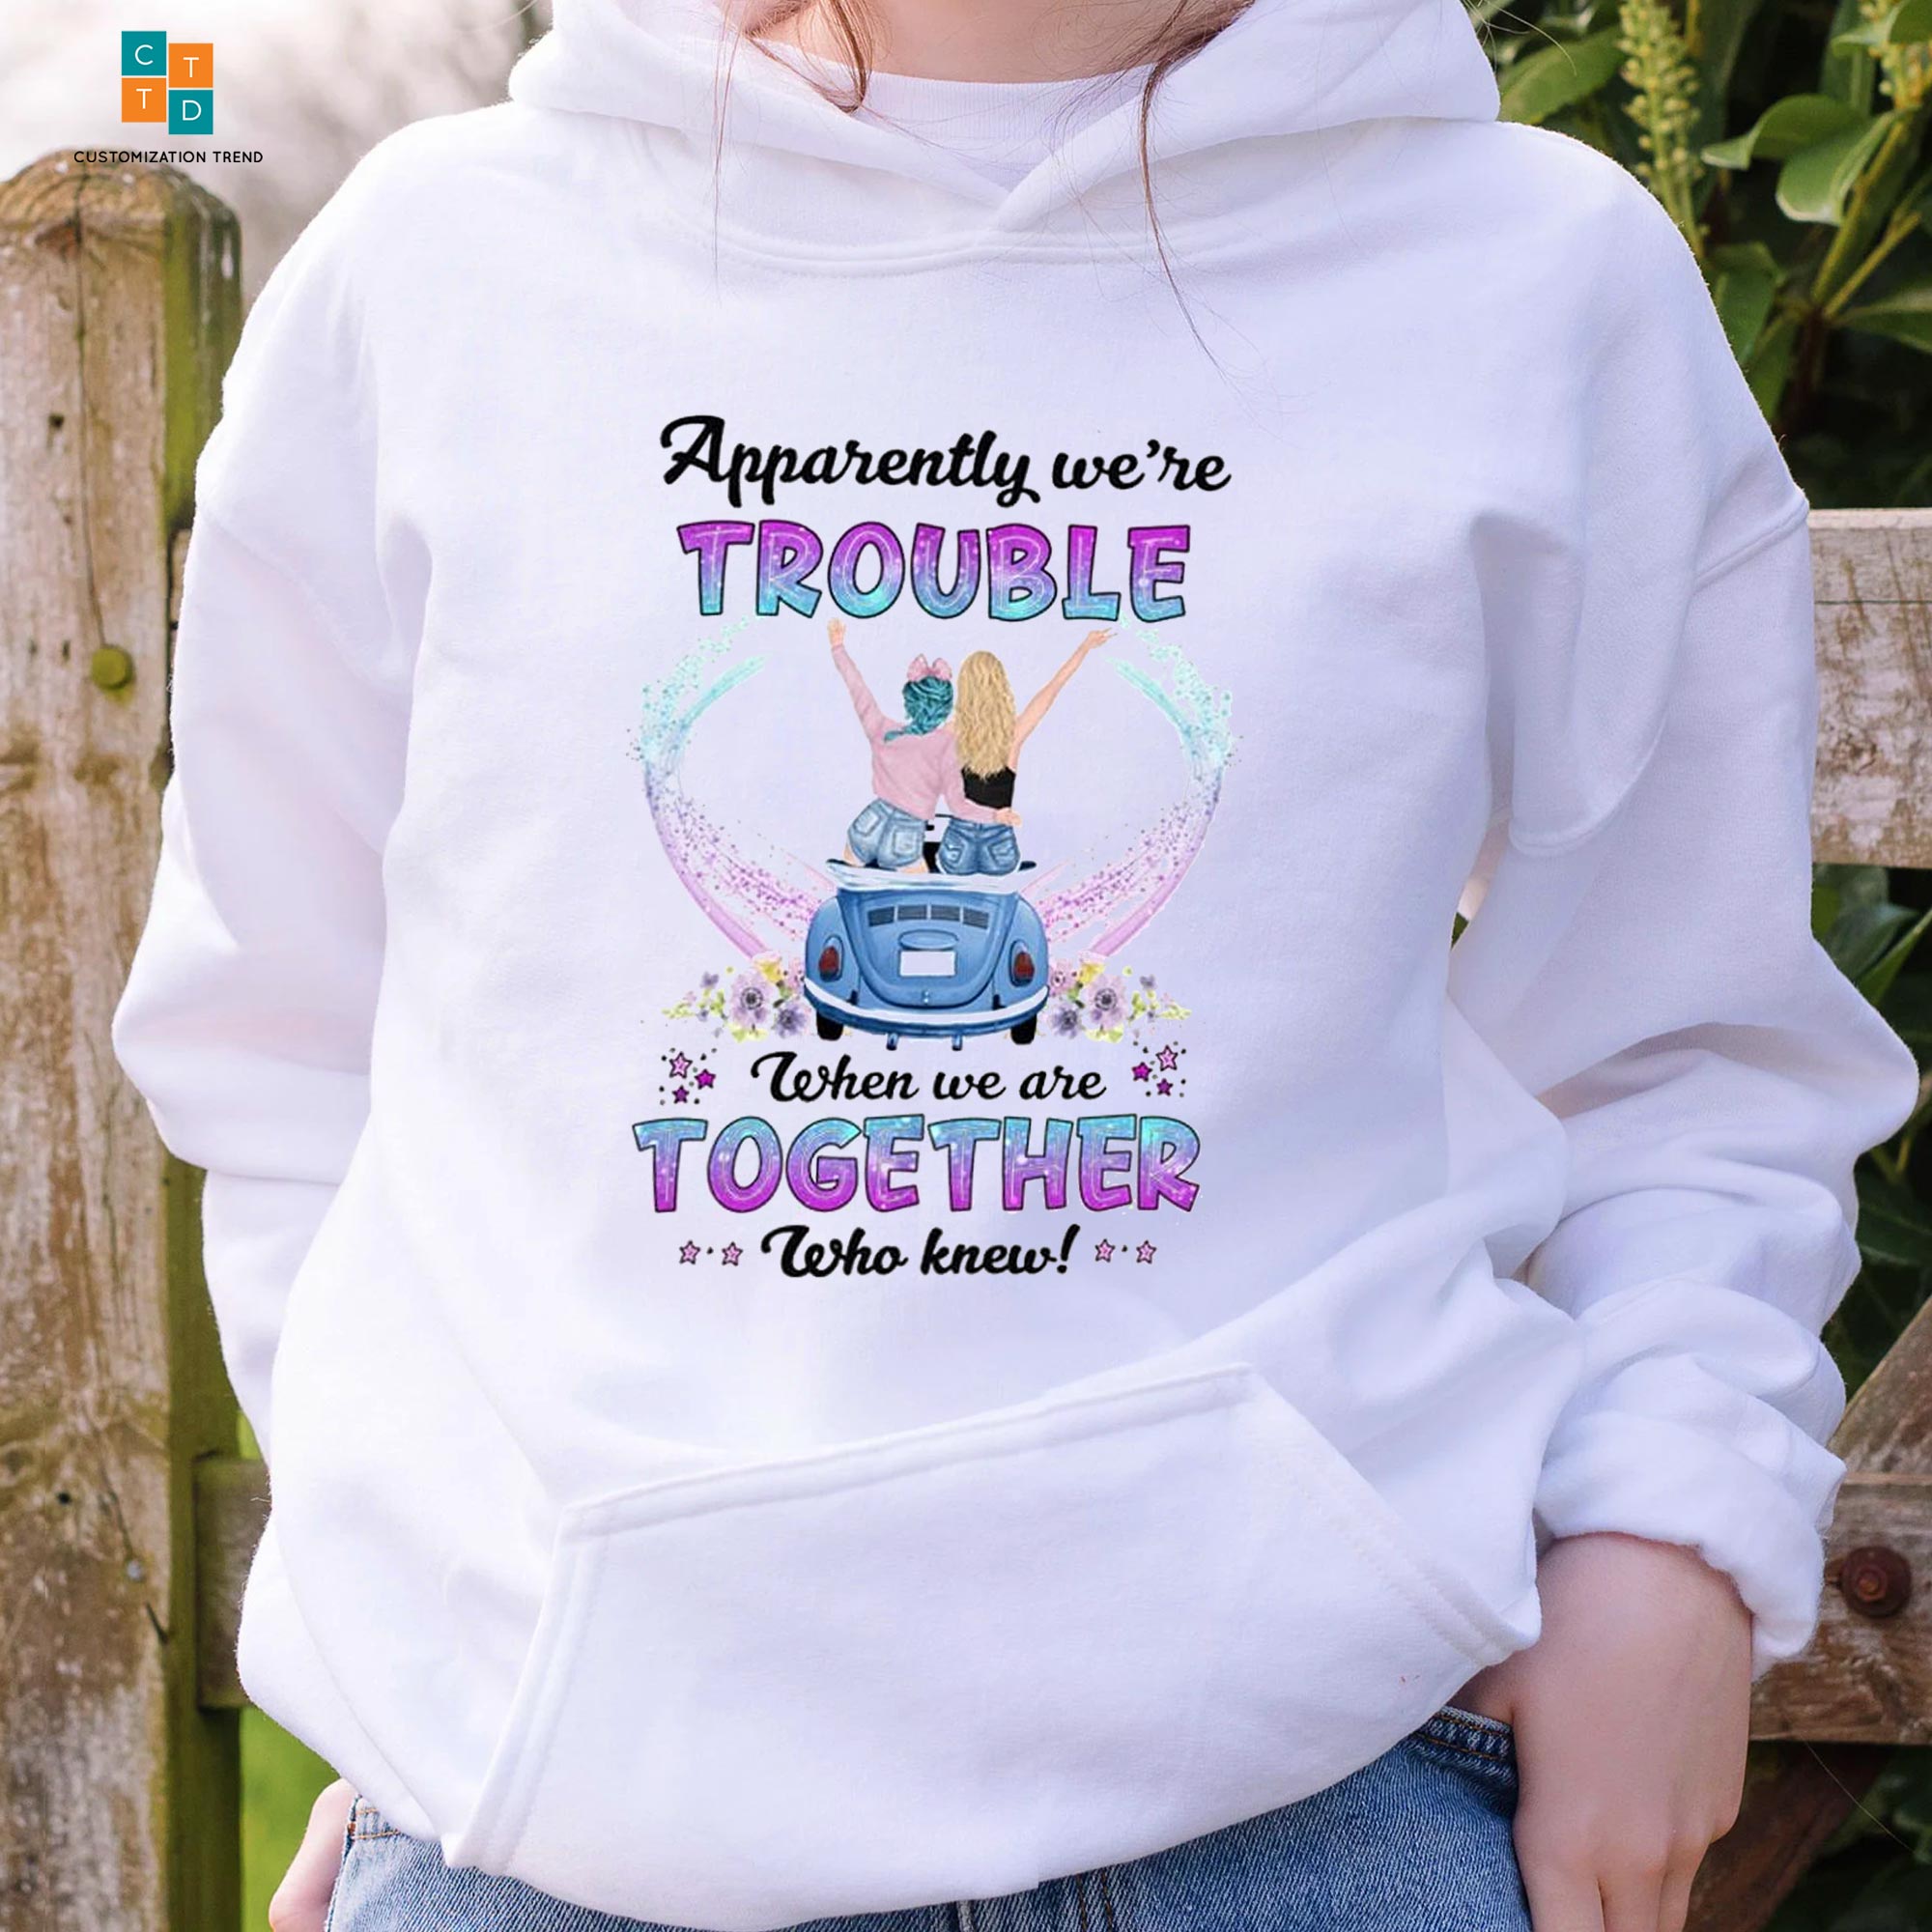 Apparently We’re Trouble When We Are Together Friends Hoodie, Shirt